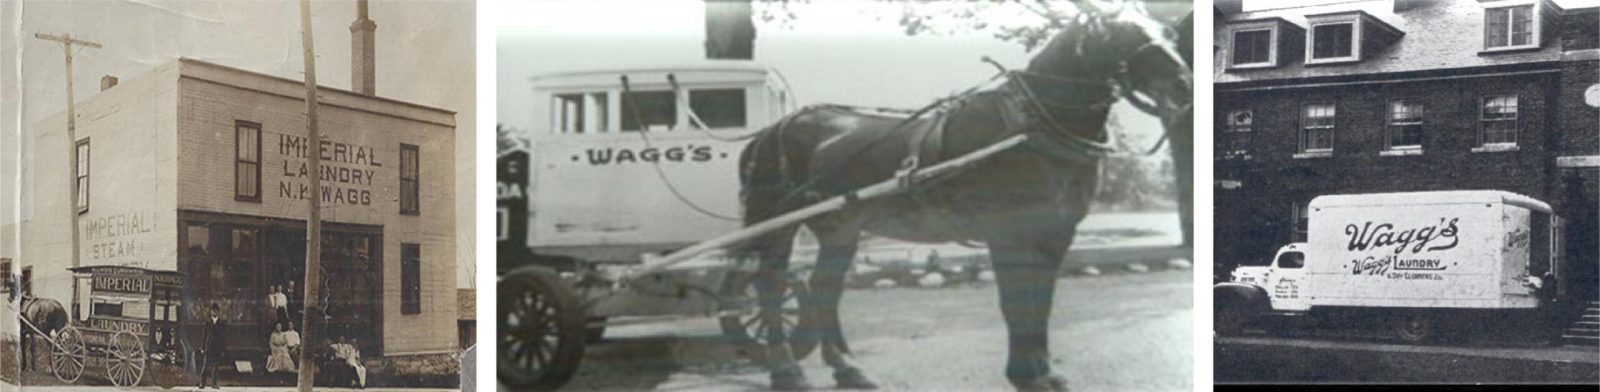 Old images of Wagg's horse and buggy delivery and old truck